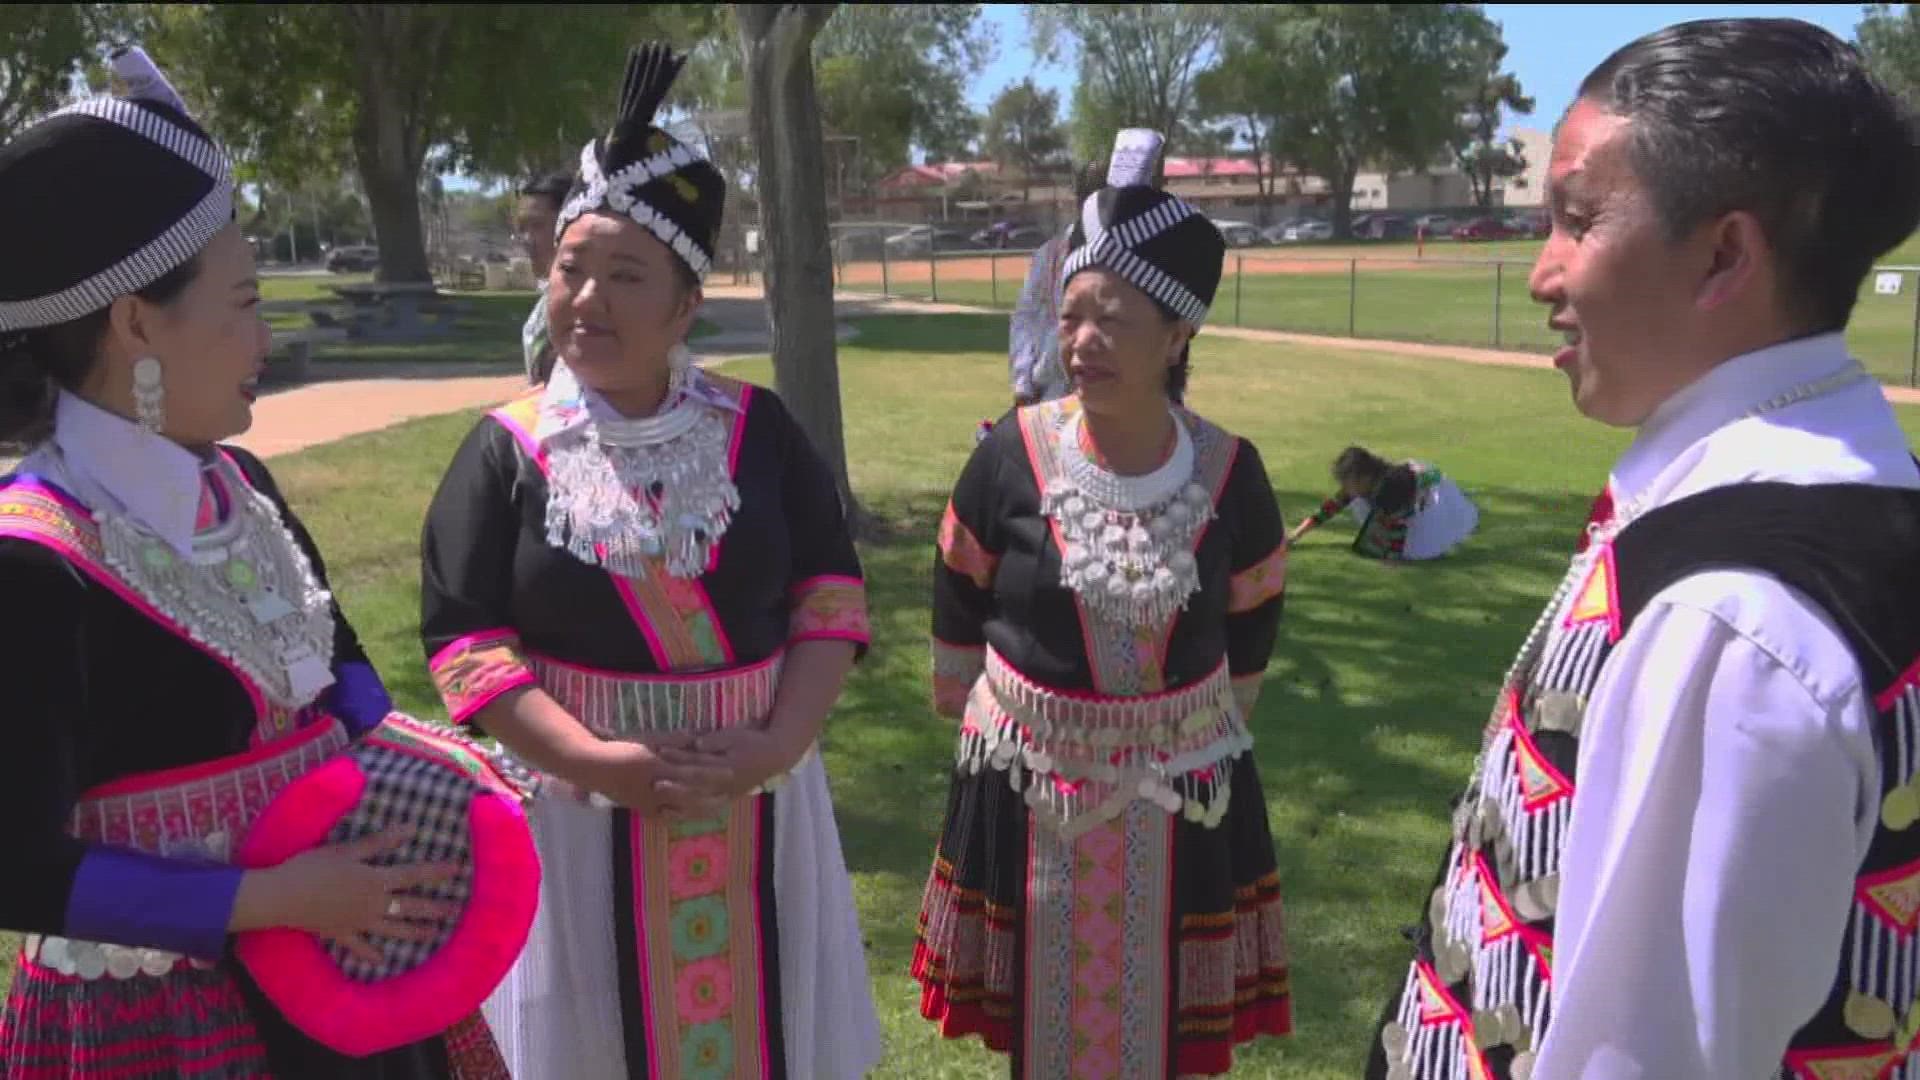 Celebrating San Diego's Hmong community keeping their culture alive